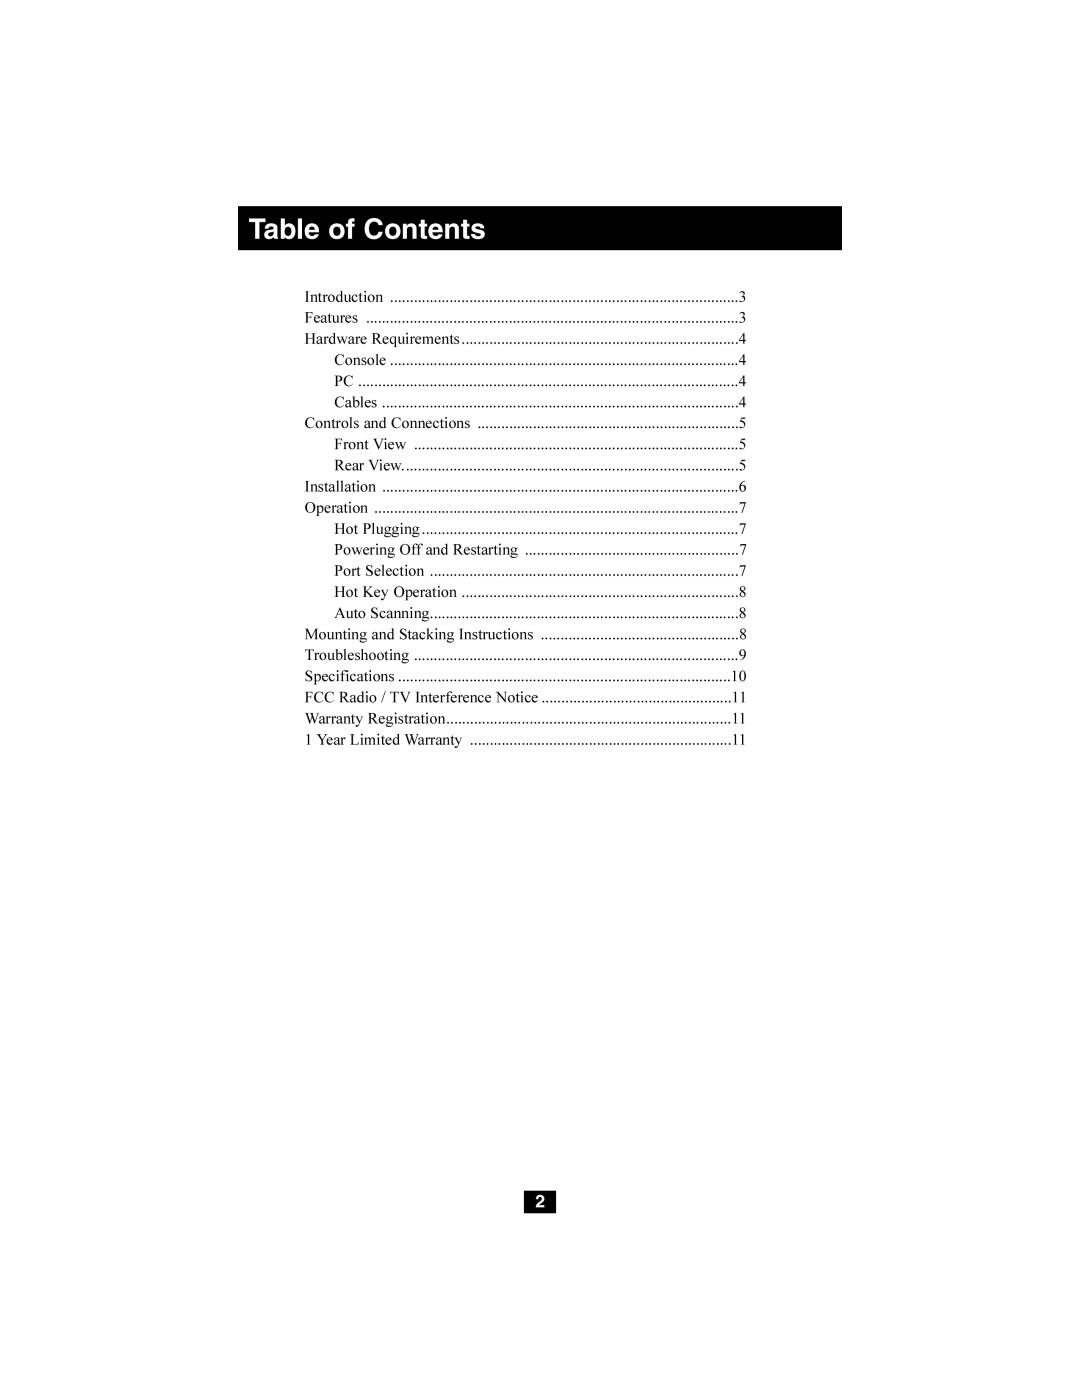 Tripp Lite B004-008 owner manual Table of Contents 